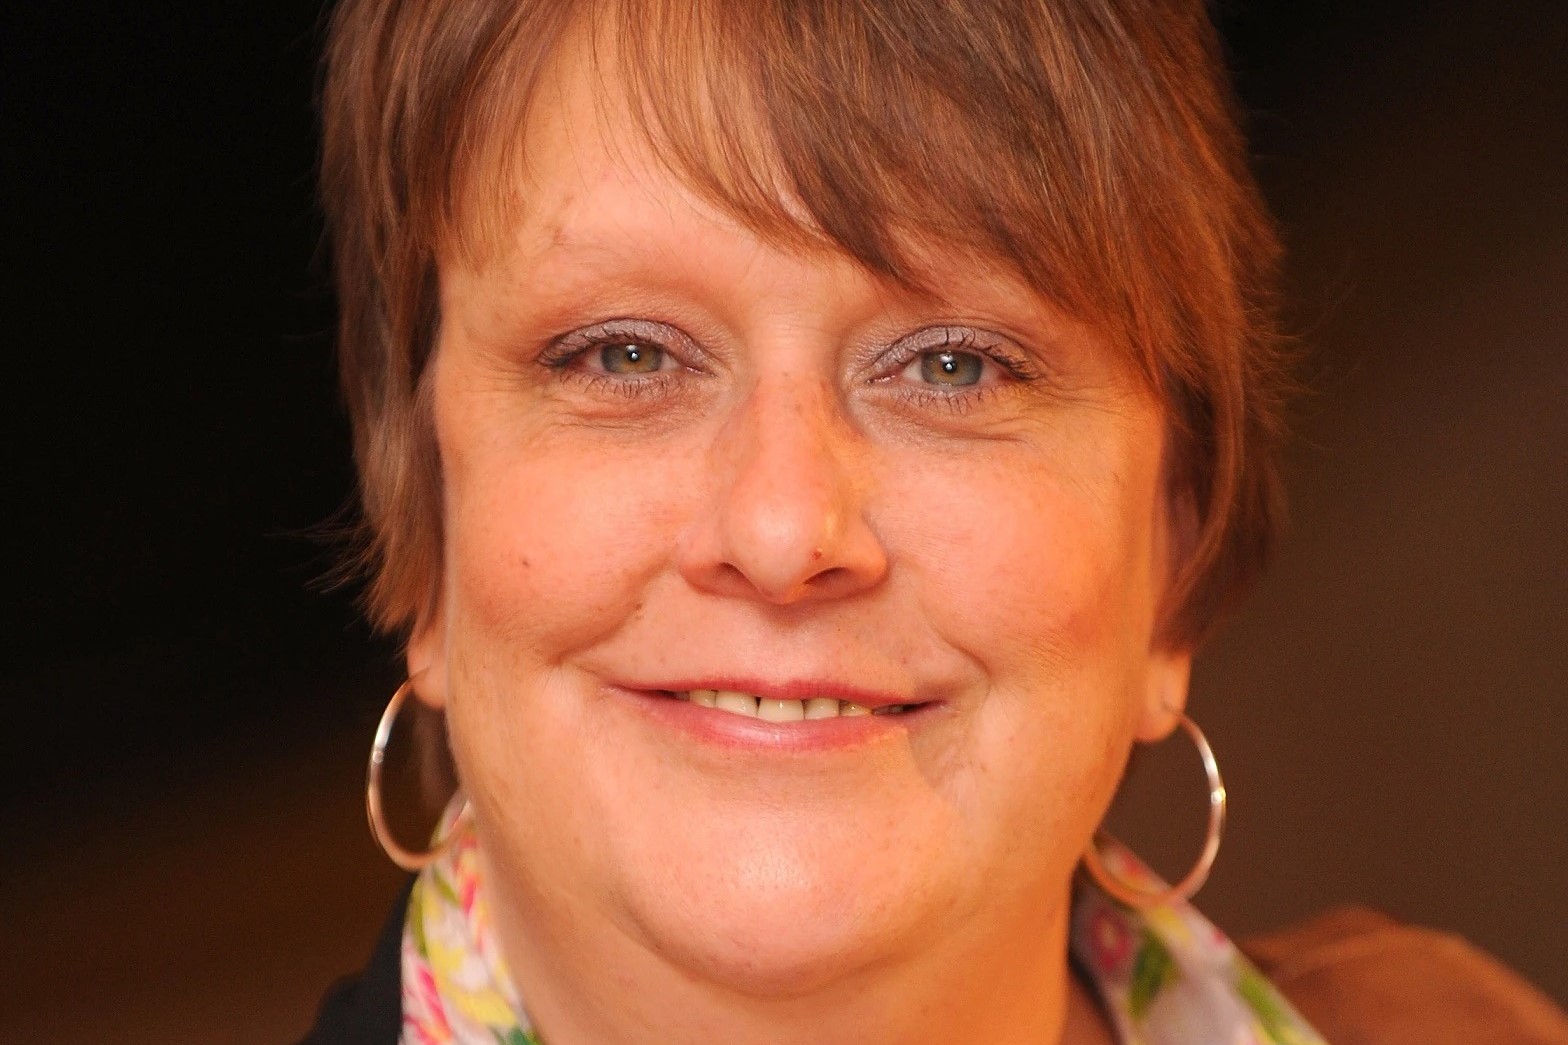 20 Astounding Facts About Kathy Burke - Facts.net